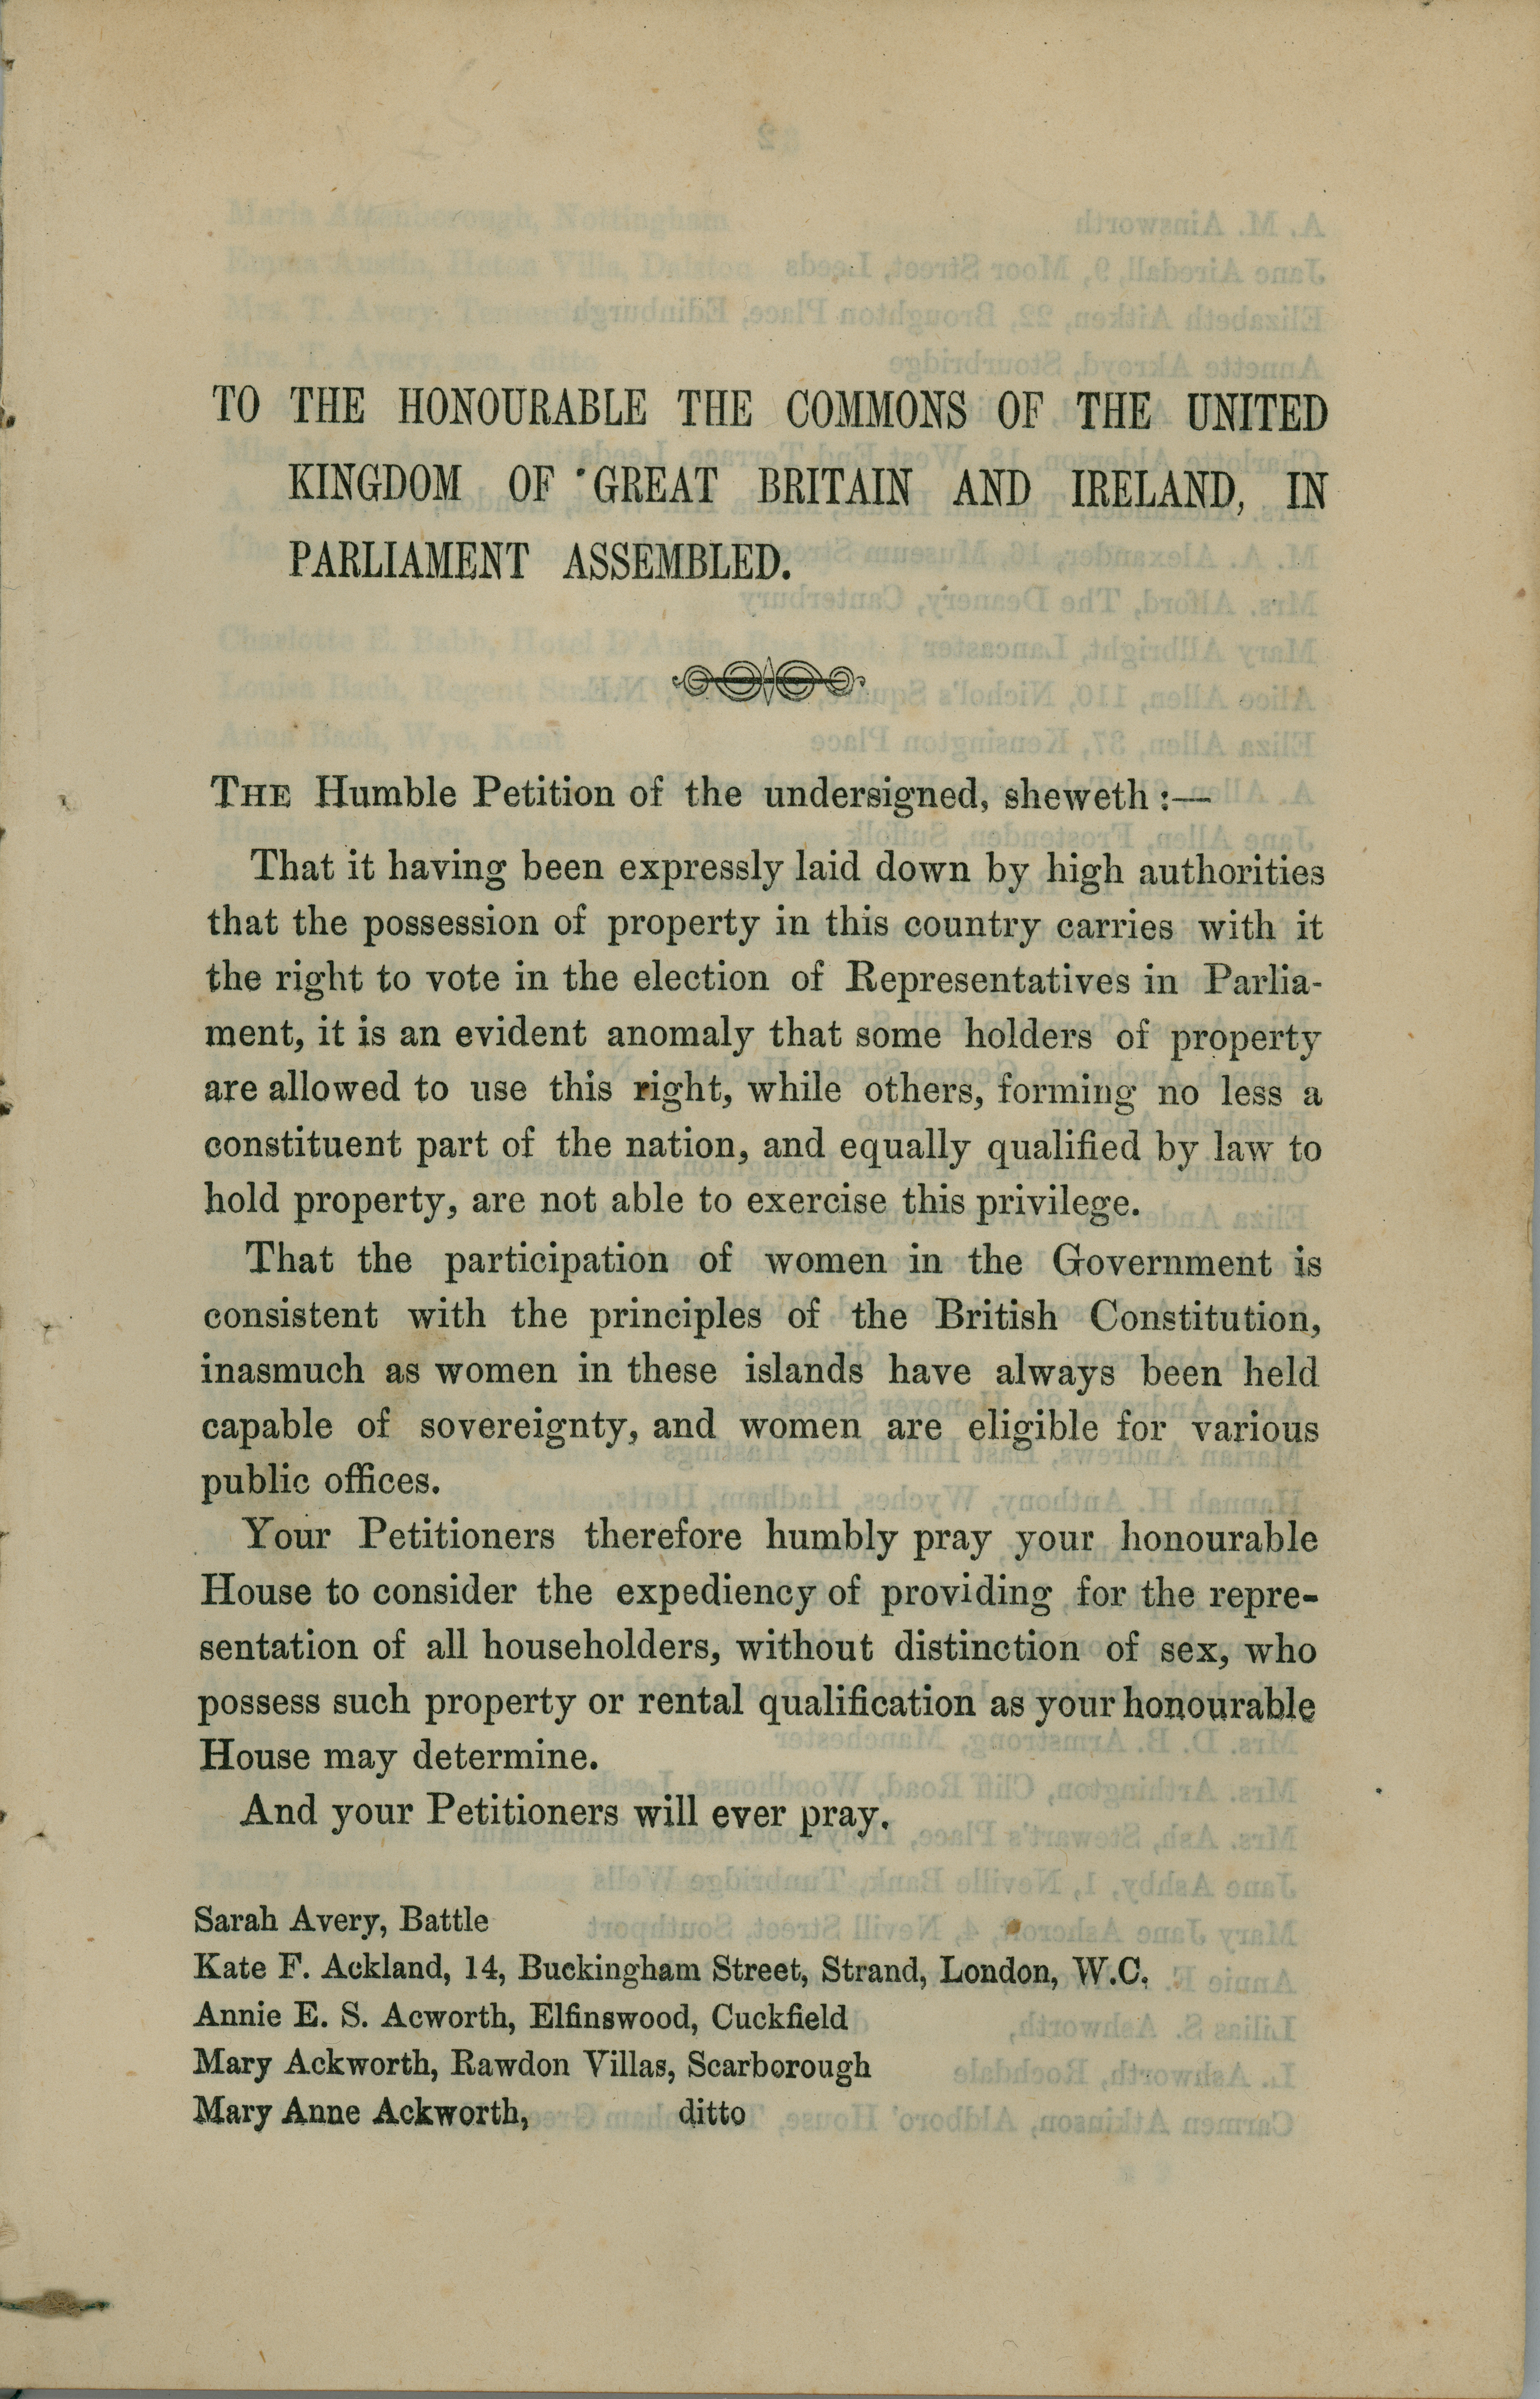 pamphlet copy of 1866 petition